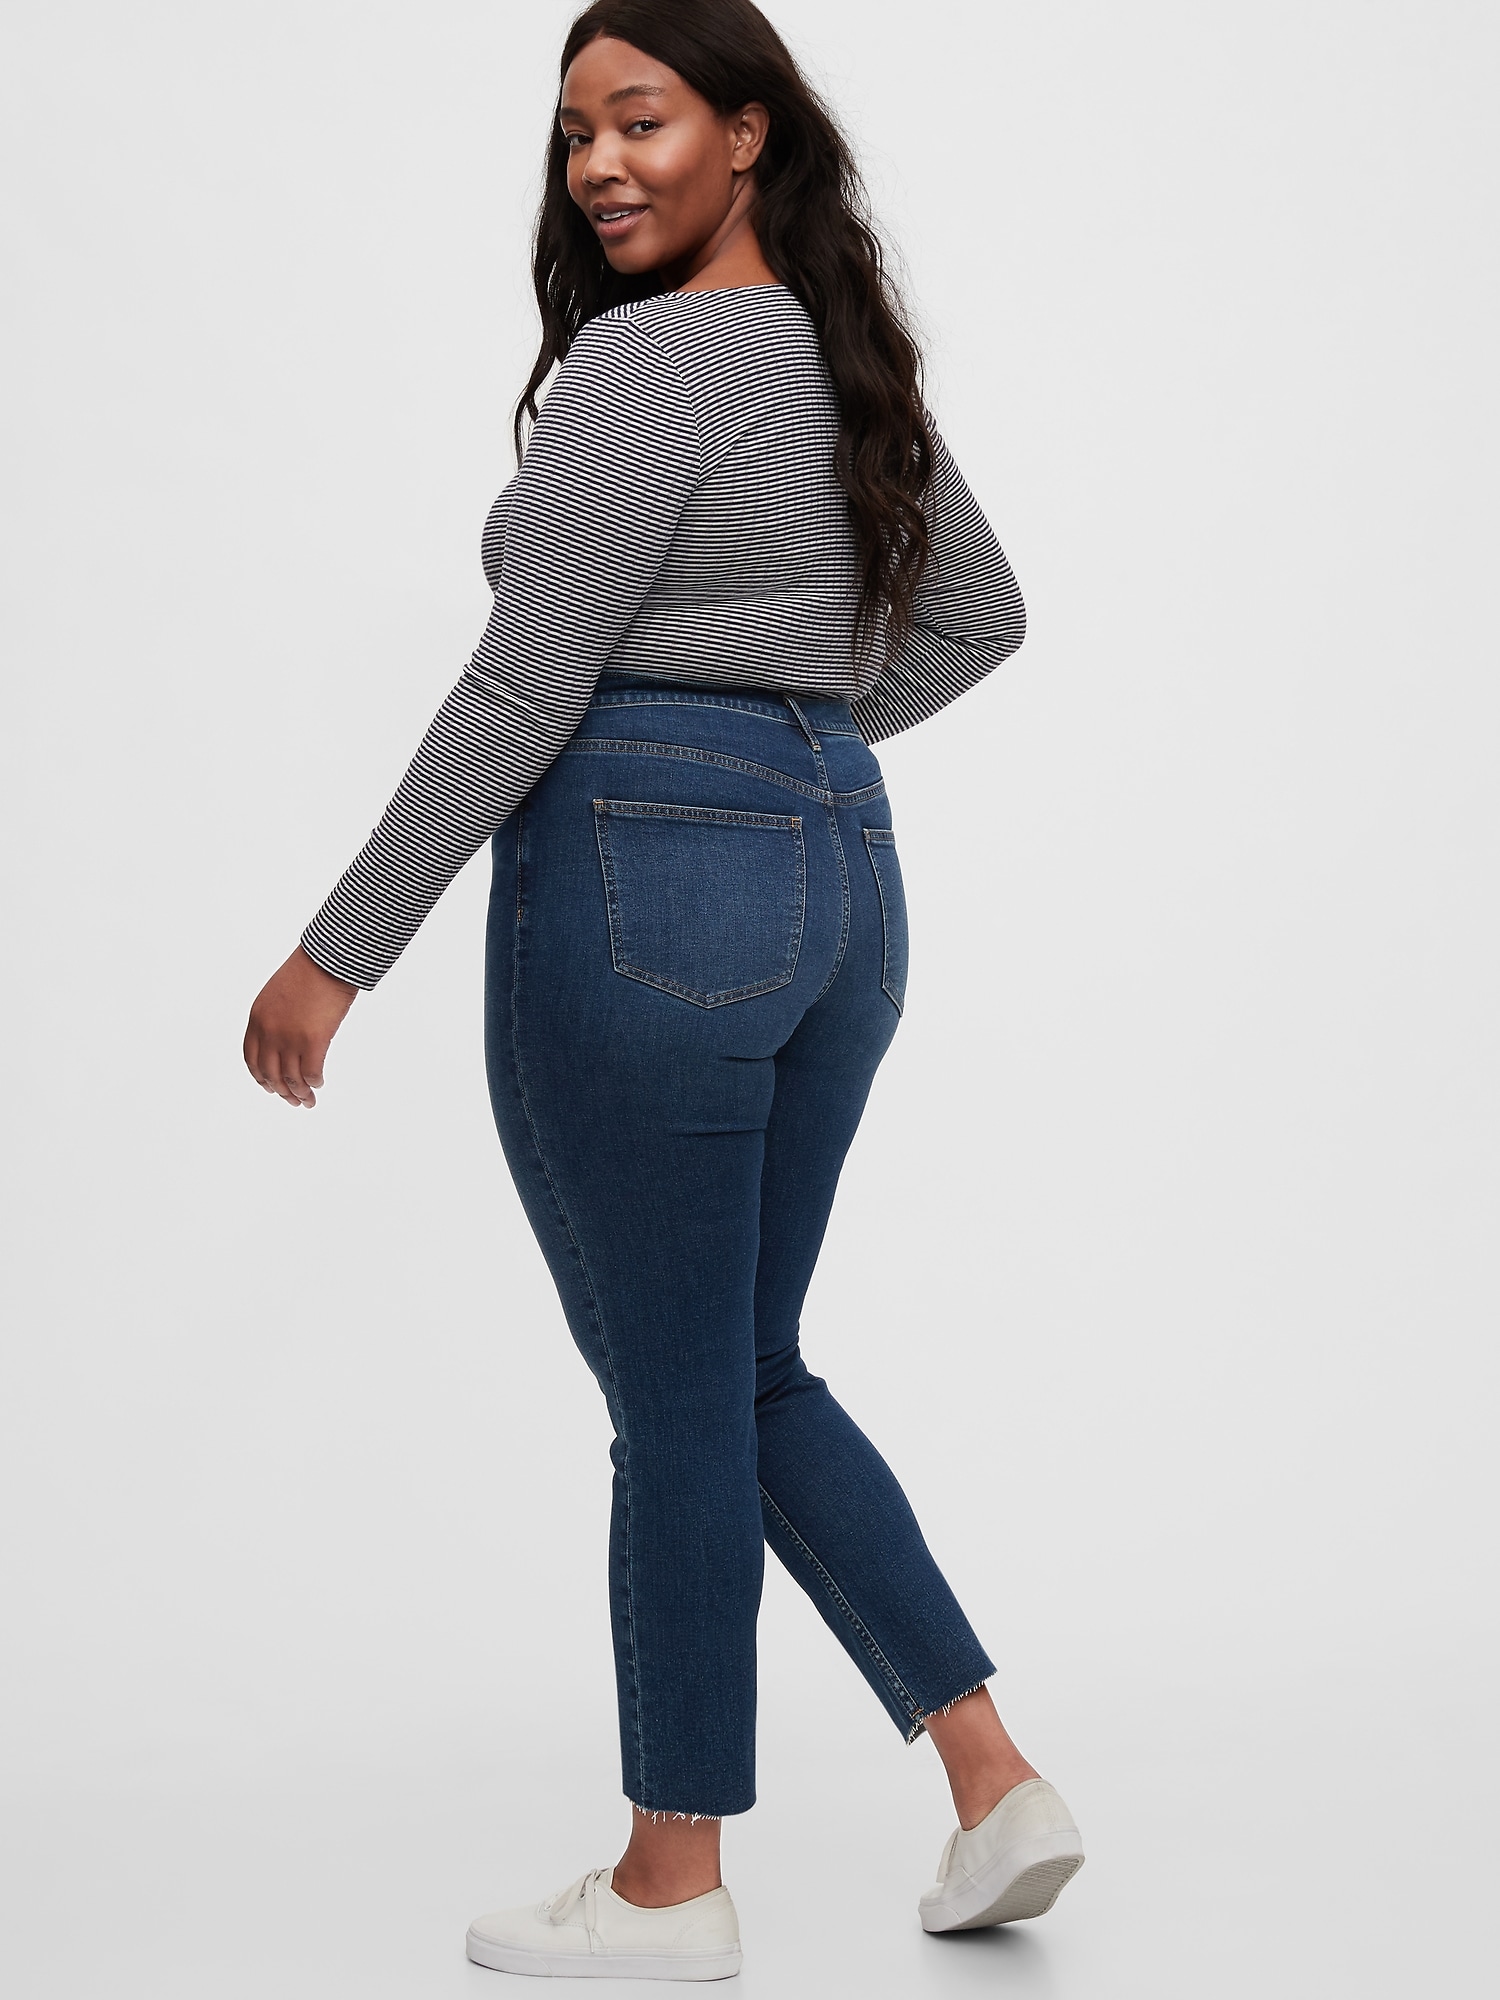 Buy Gap High Waisted Vintage Slim Fit Washwell Jeans from the Gap online  shop